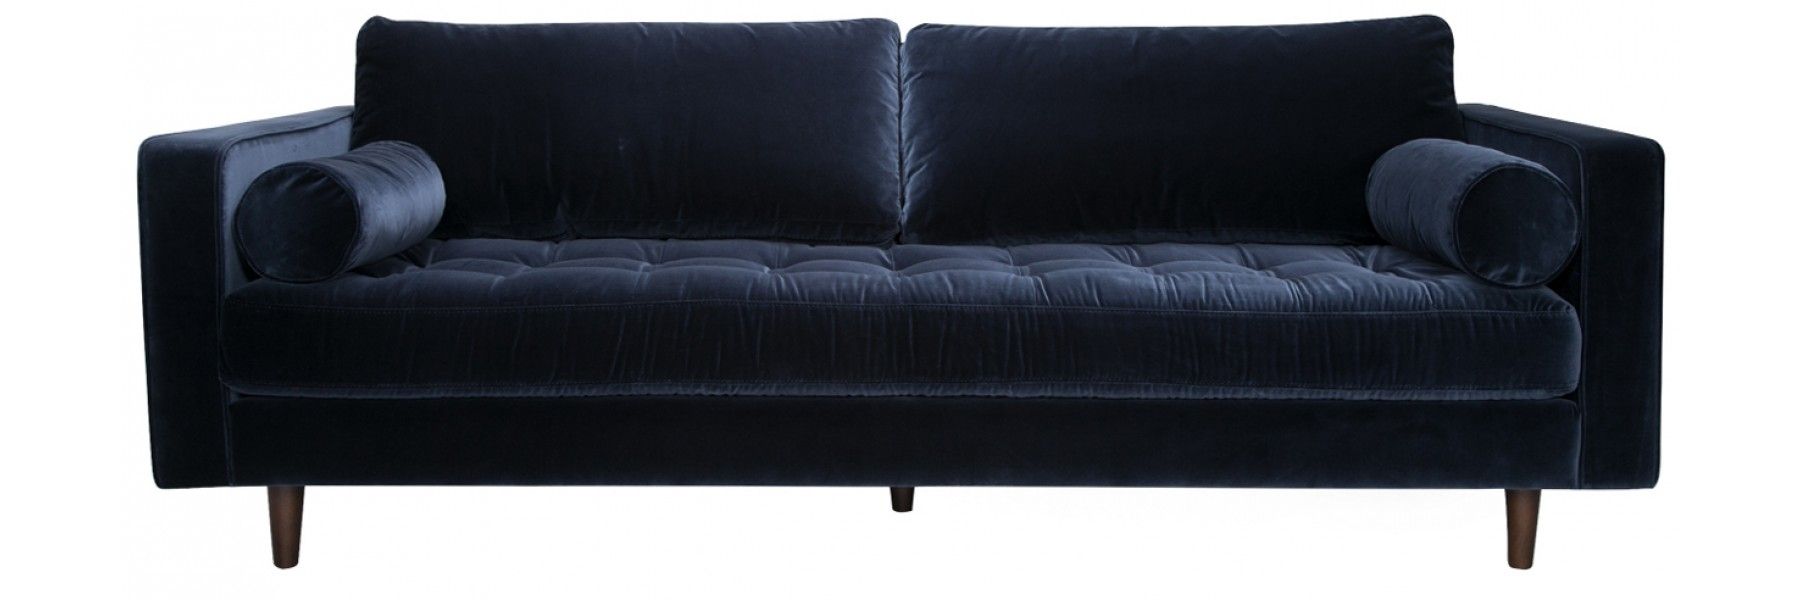 Sawyer Sofa Navy Regarding Nico Grey Sectionals With Left Facing Storage Chaise (View 7 of 30)